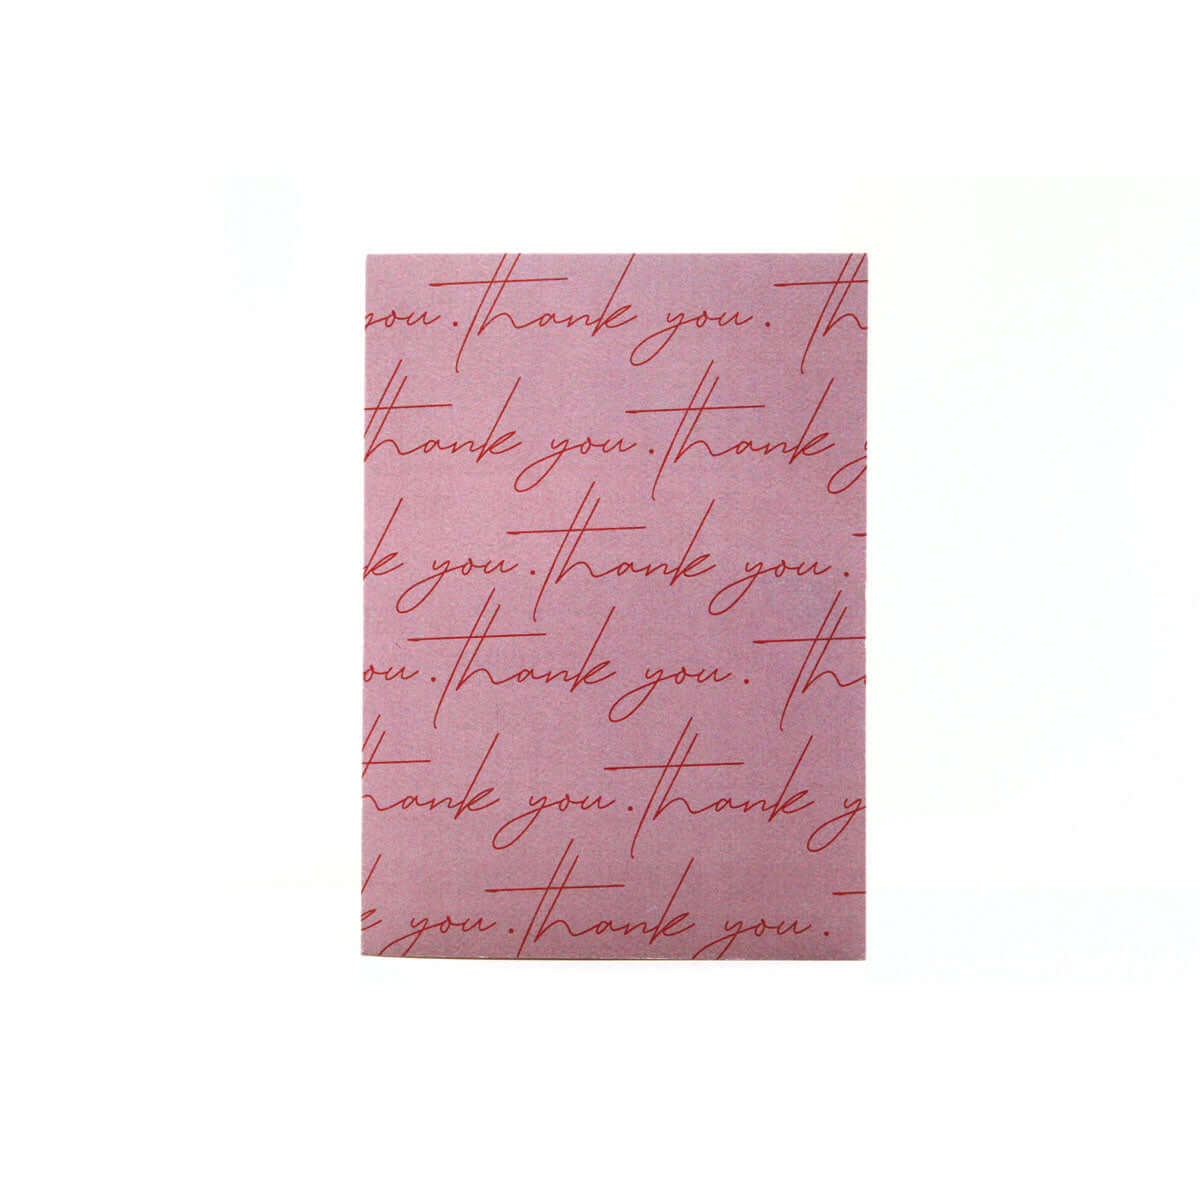 pink card that reads "thank you" in red cursive letters multiple times on the cover